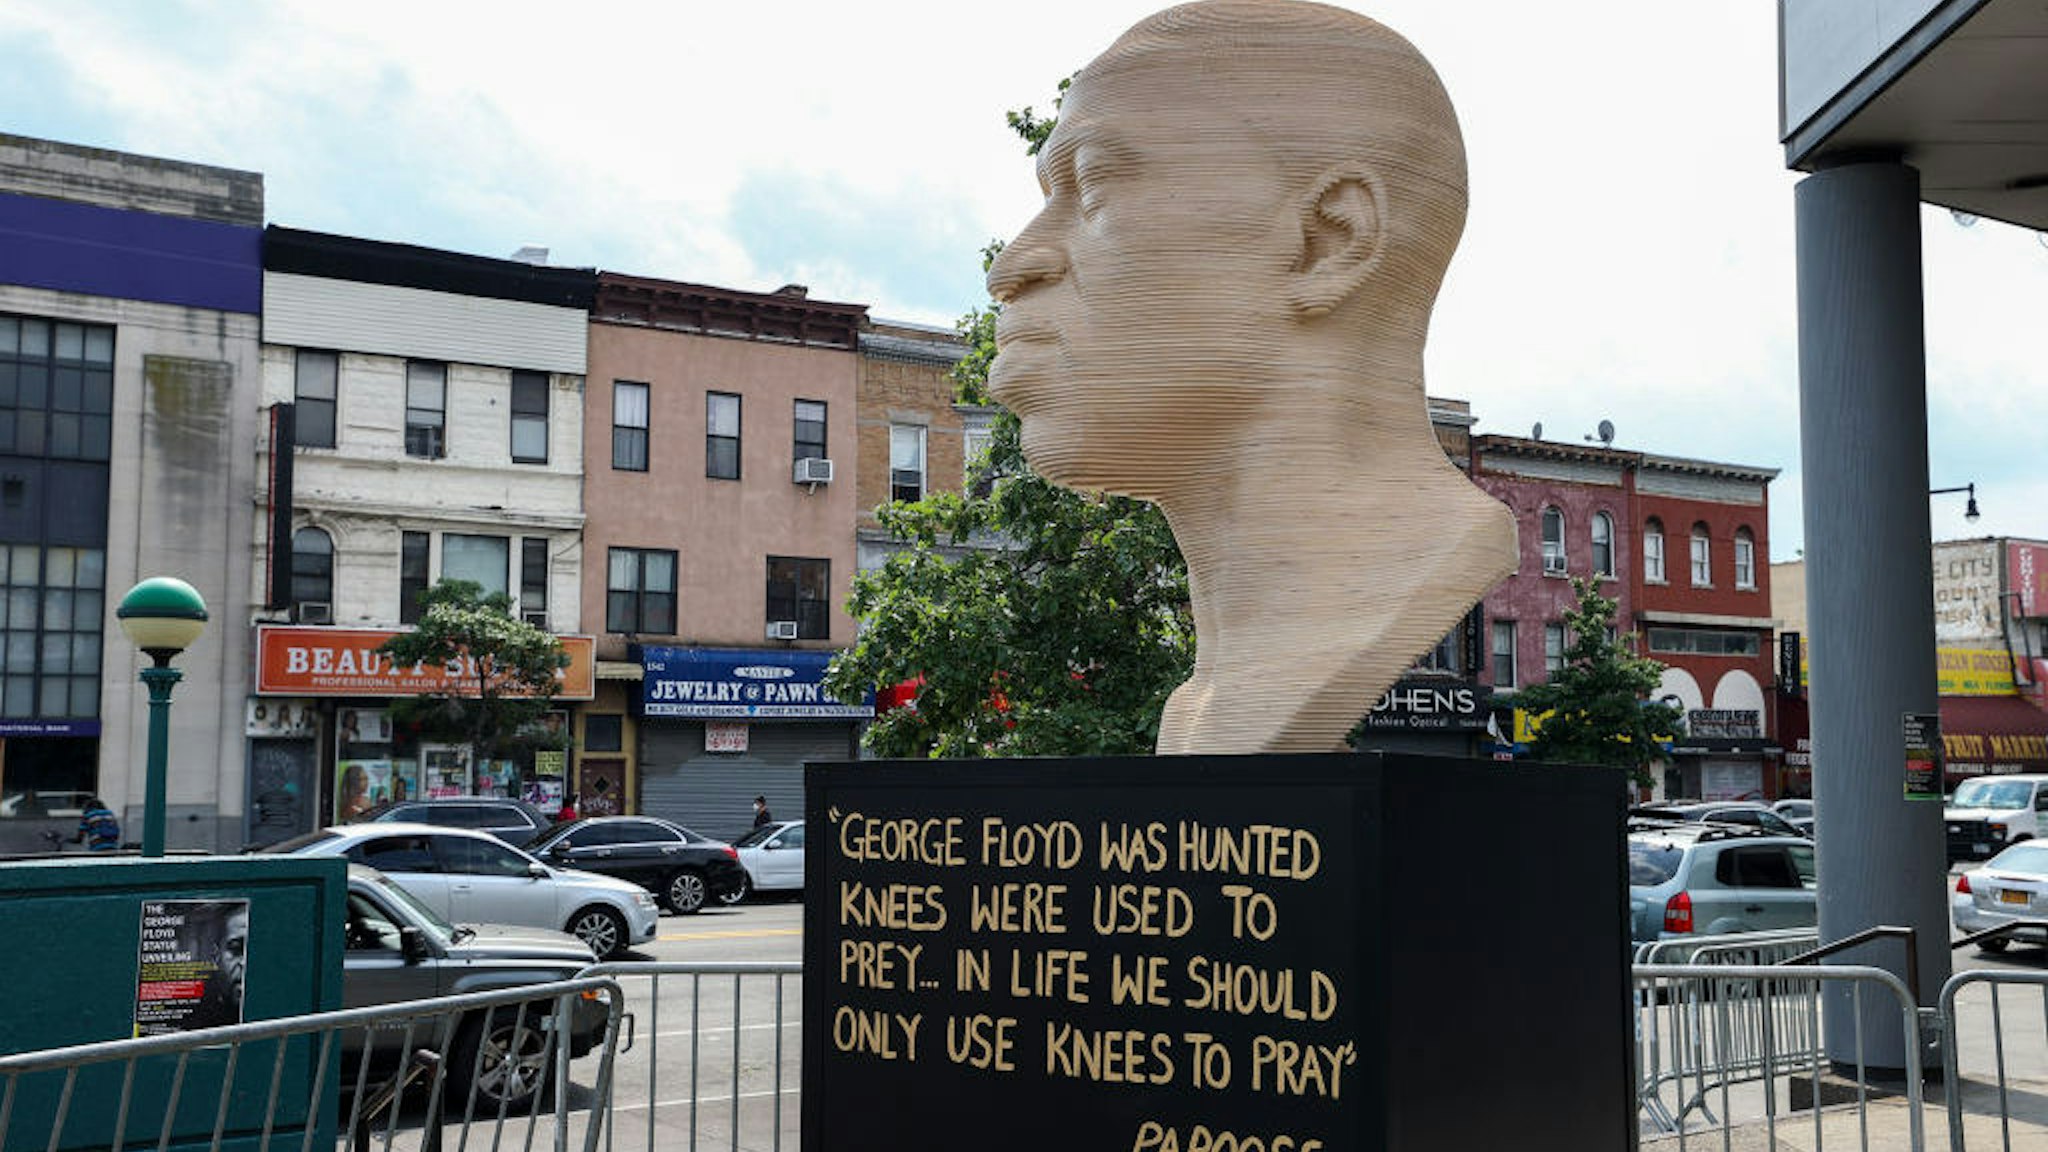 NEW YORK, USA - JUNE 19: A George Floyd statue by artist Chris Carnabuci was unveiled as part of Juneteenth celebration in Brooklyn of New York City, United States on June 19, 2021. (Photo by Tayfun Coskun/Anadolu Agency via Getty Images)